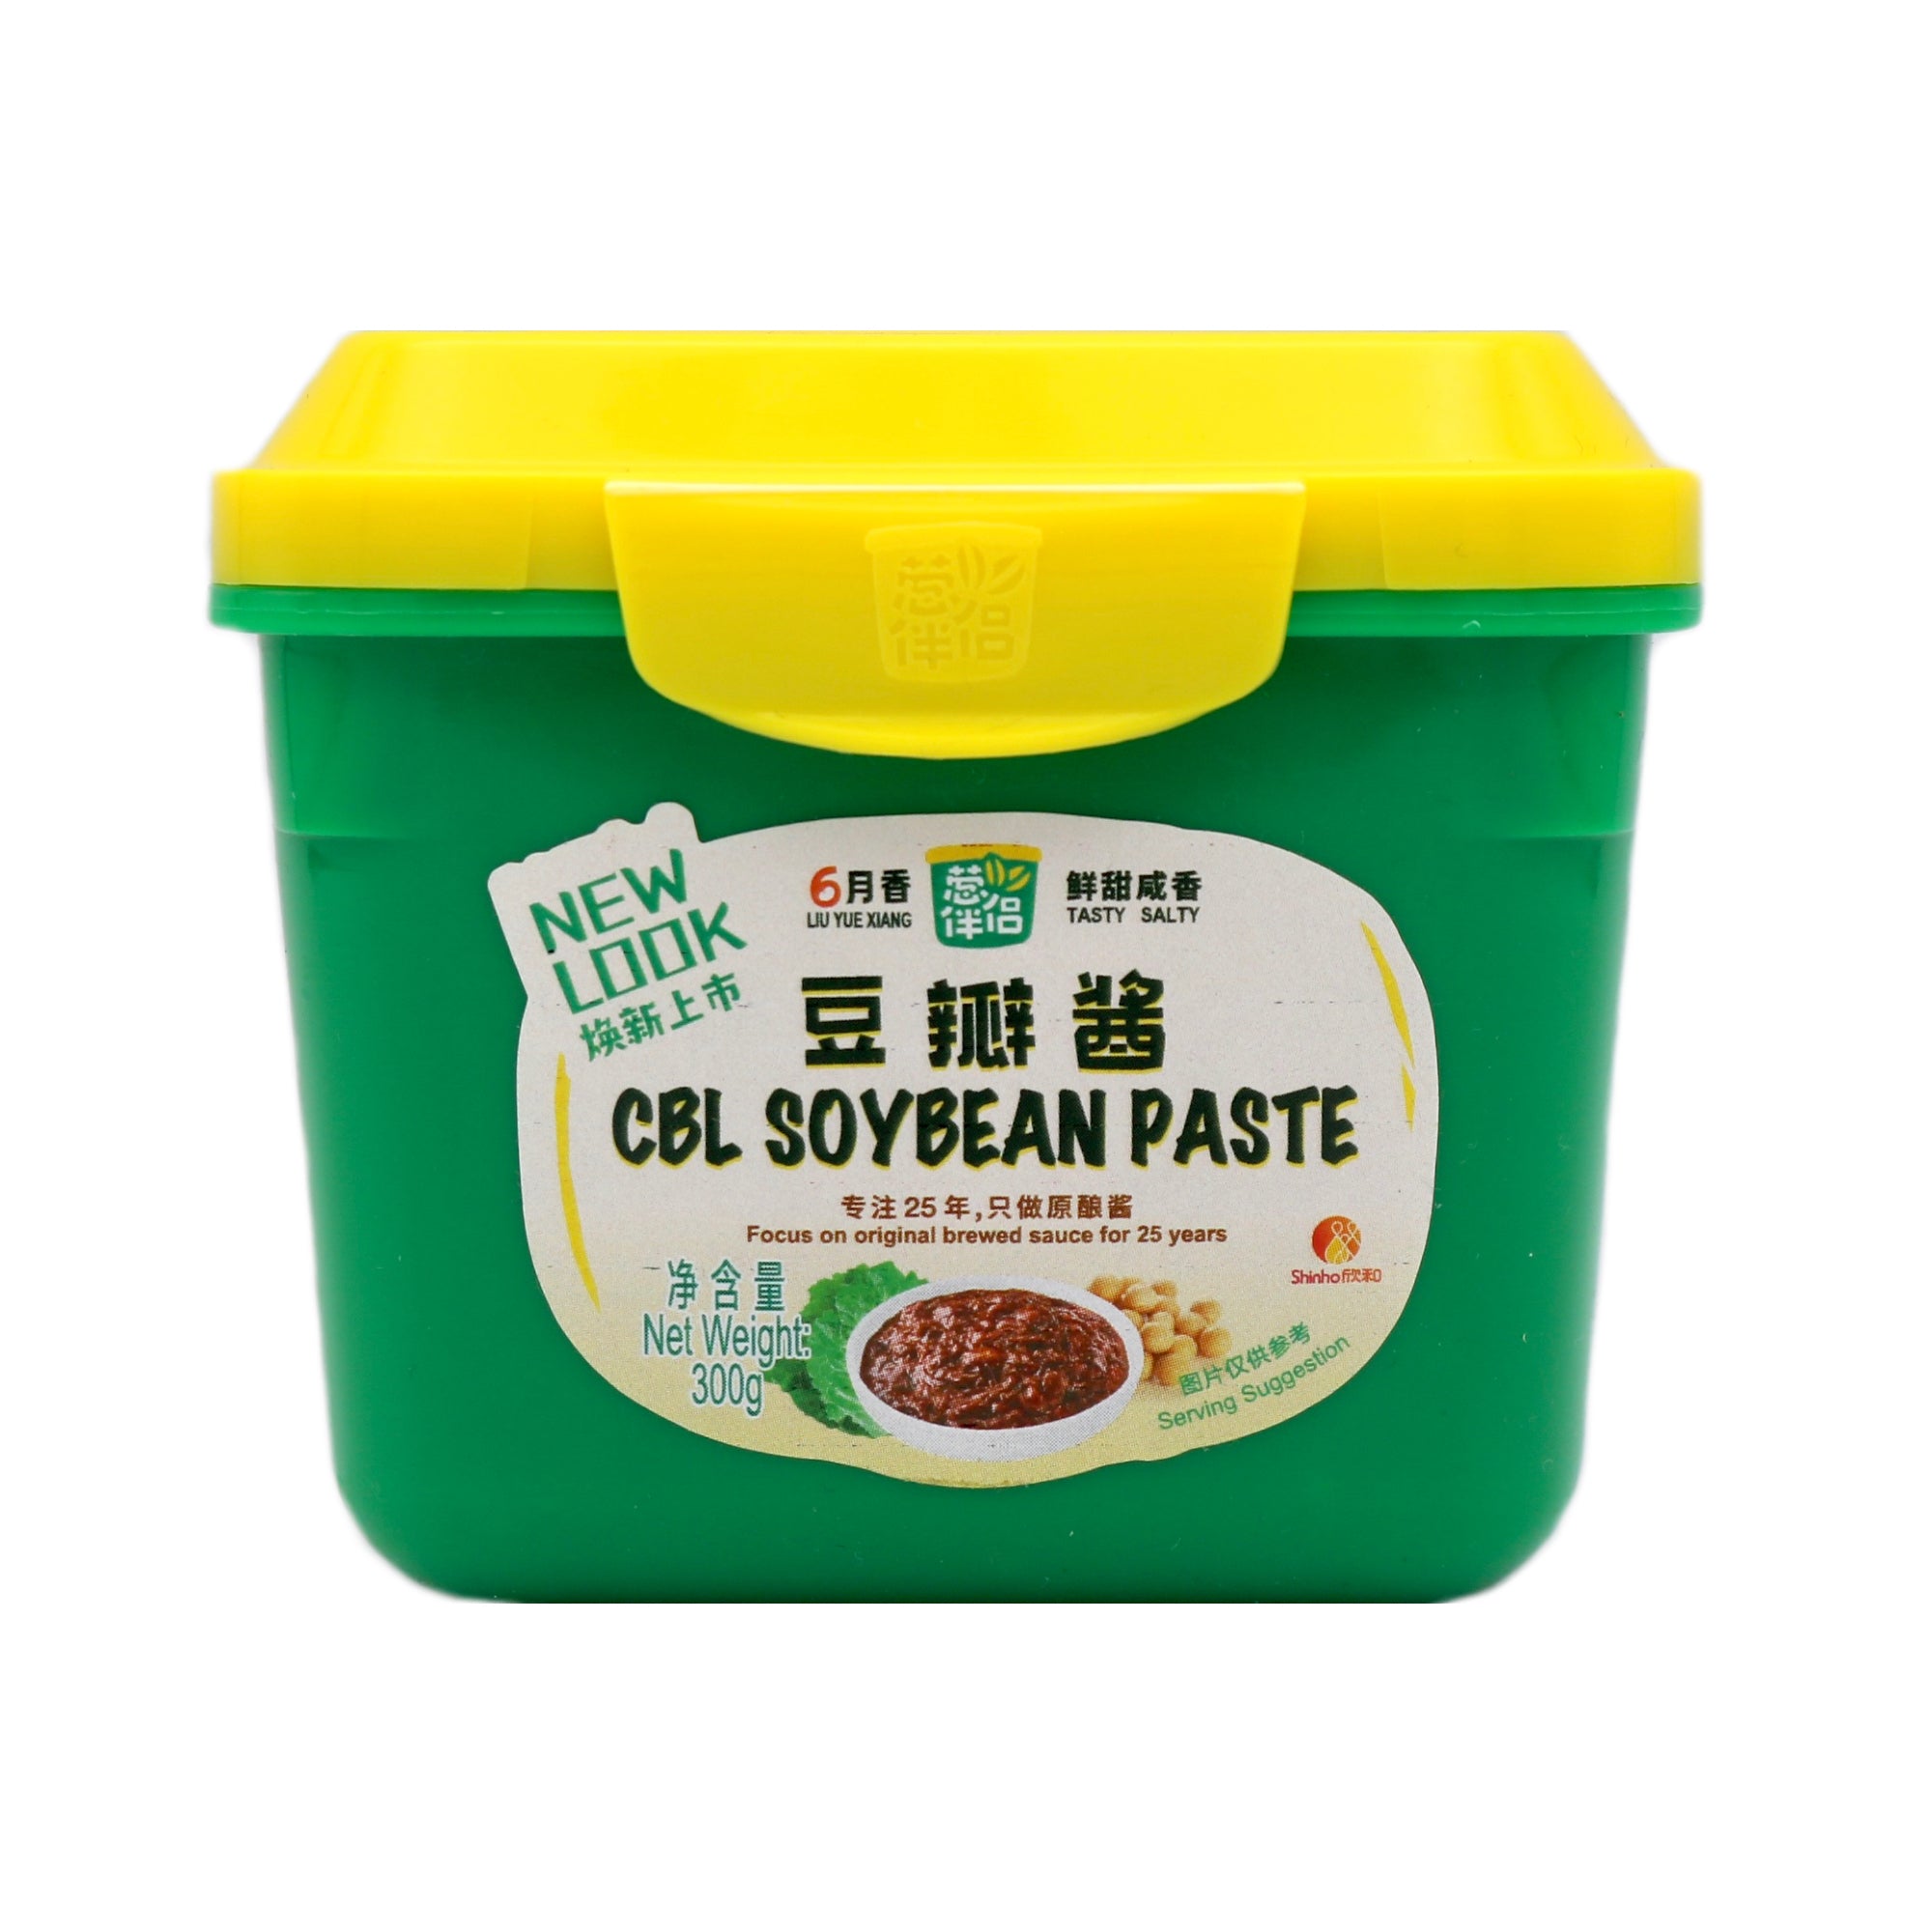 Get Haday Yes! Soybean Paste Delivered